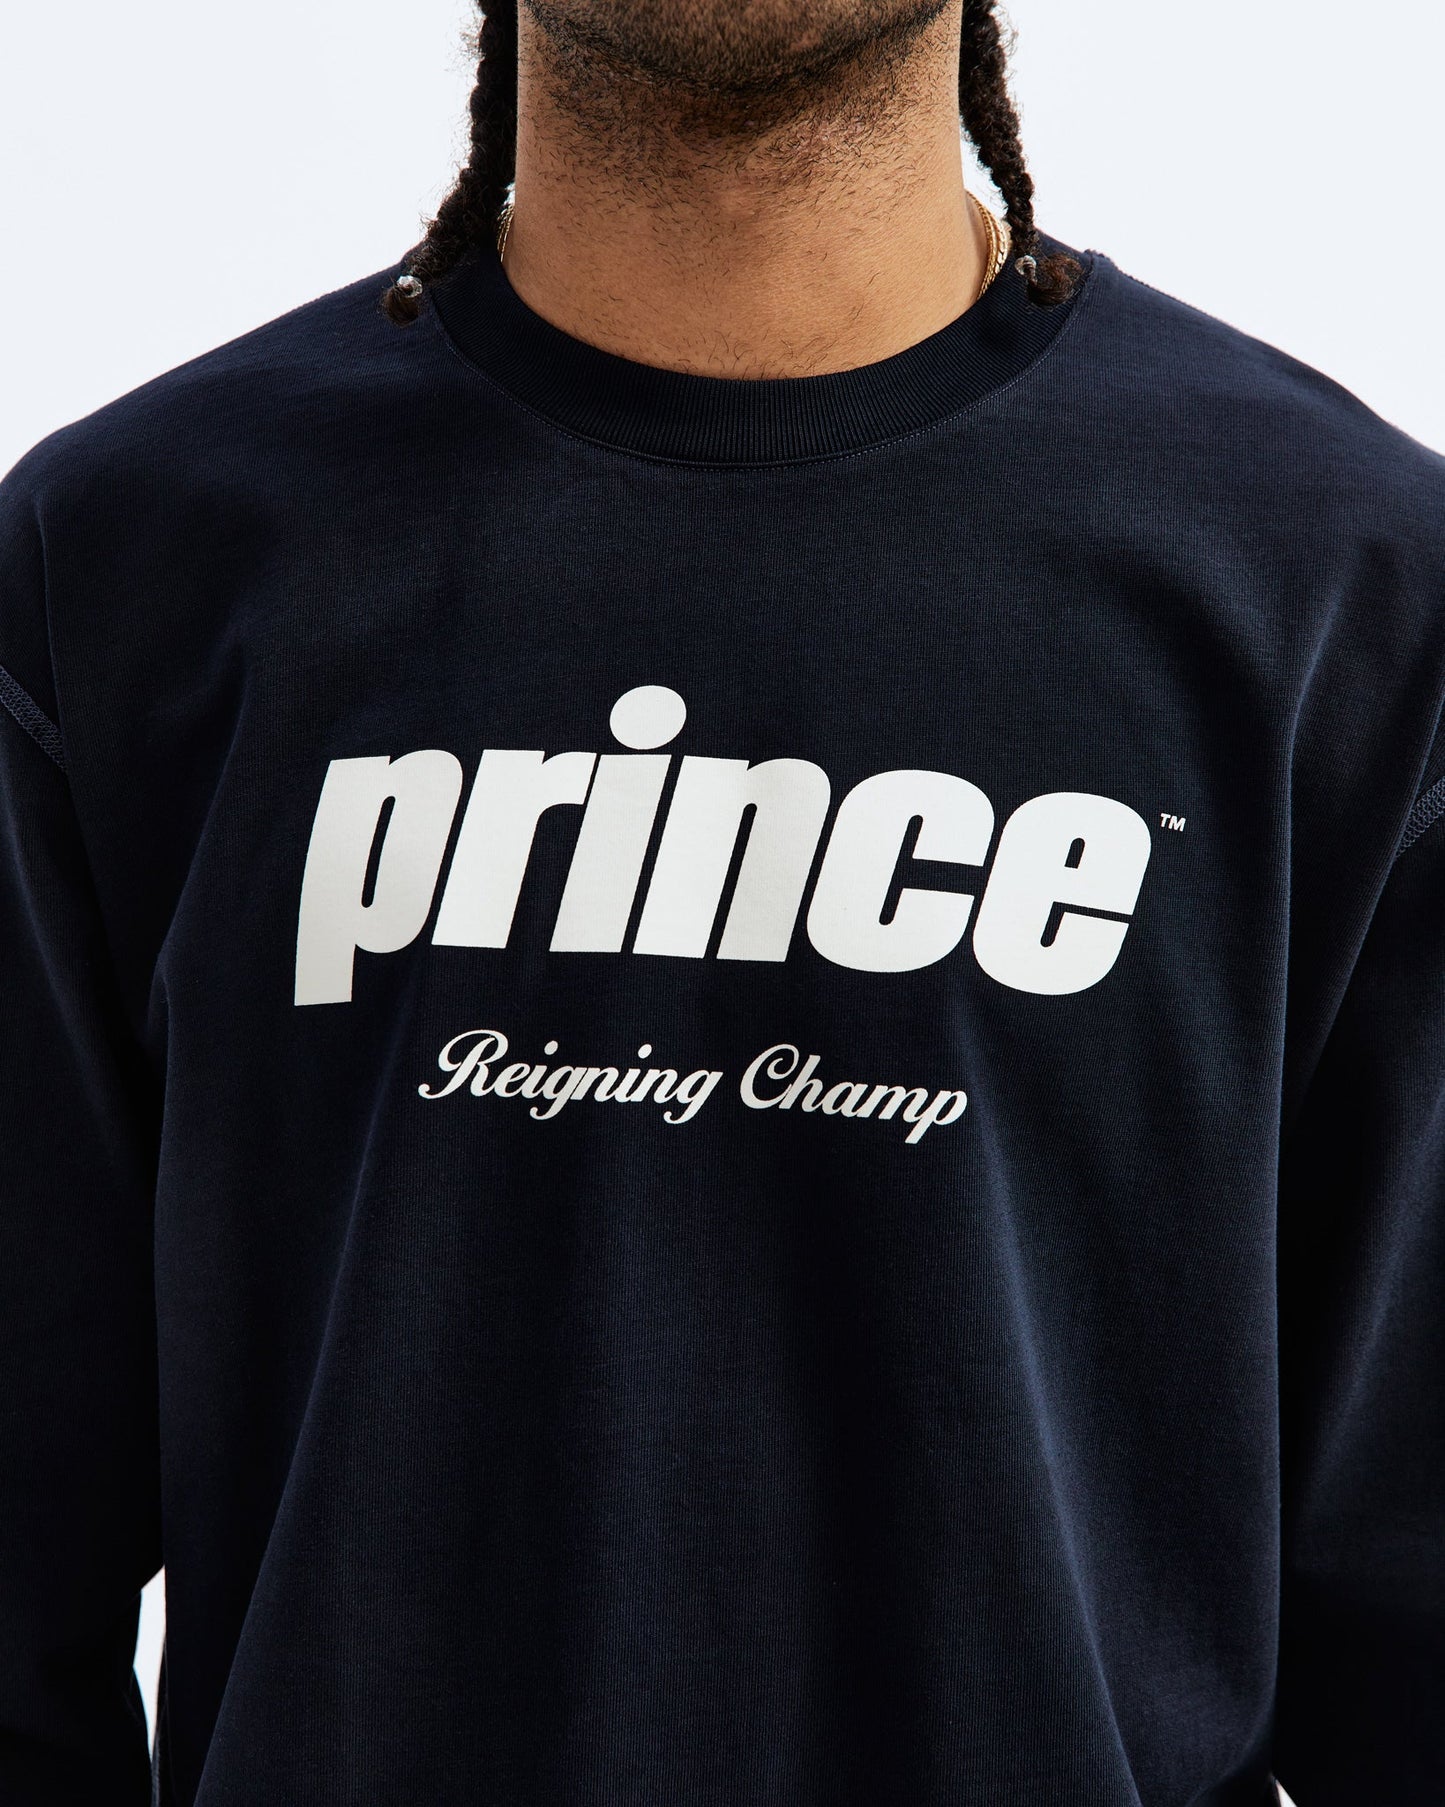 Prince Midweight Jersey Long Sleeve